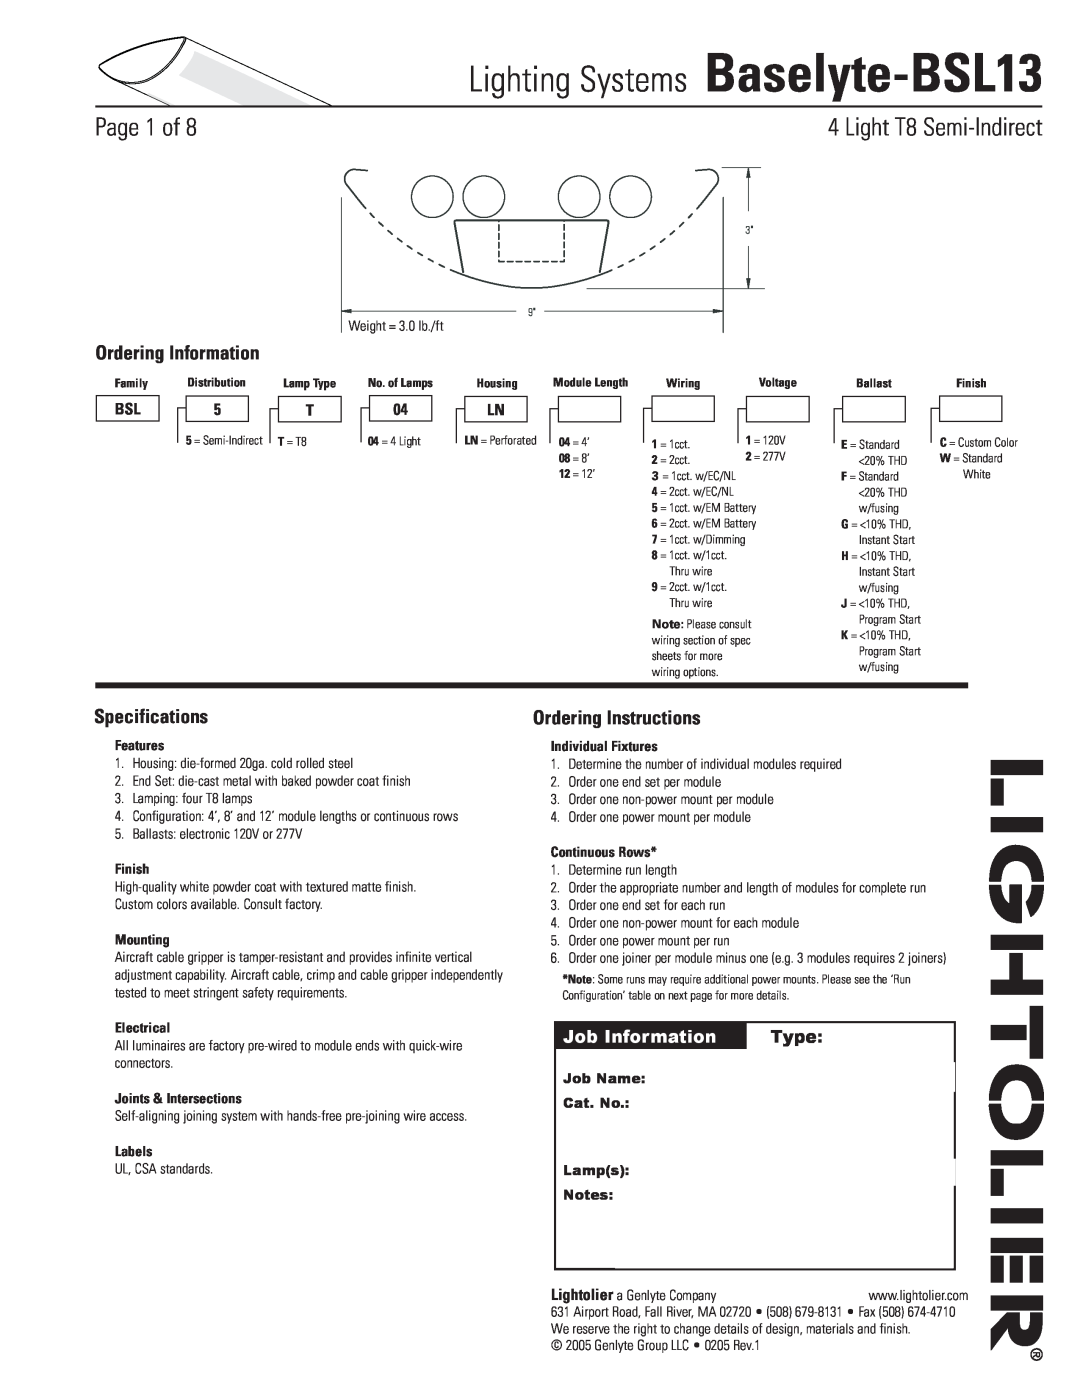 Lightolier specifications Lighting Systems Baselyte-BSL13, Page  of, Light T8 Semi-Indirect, Ordering Information 